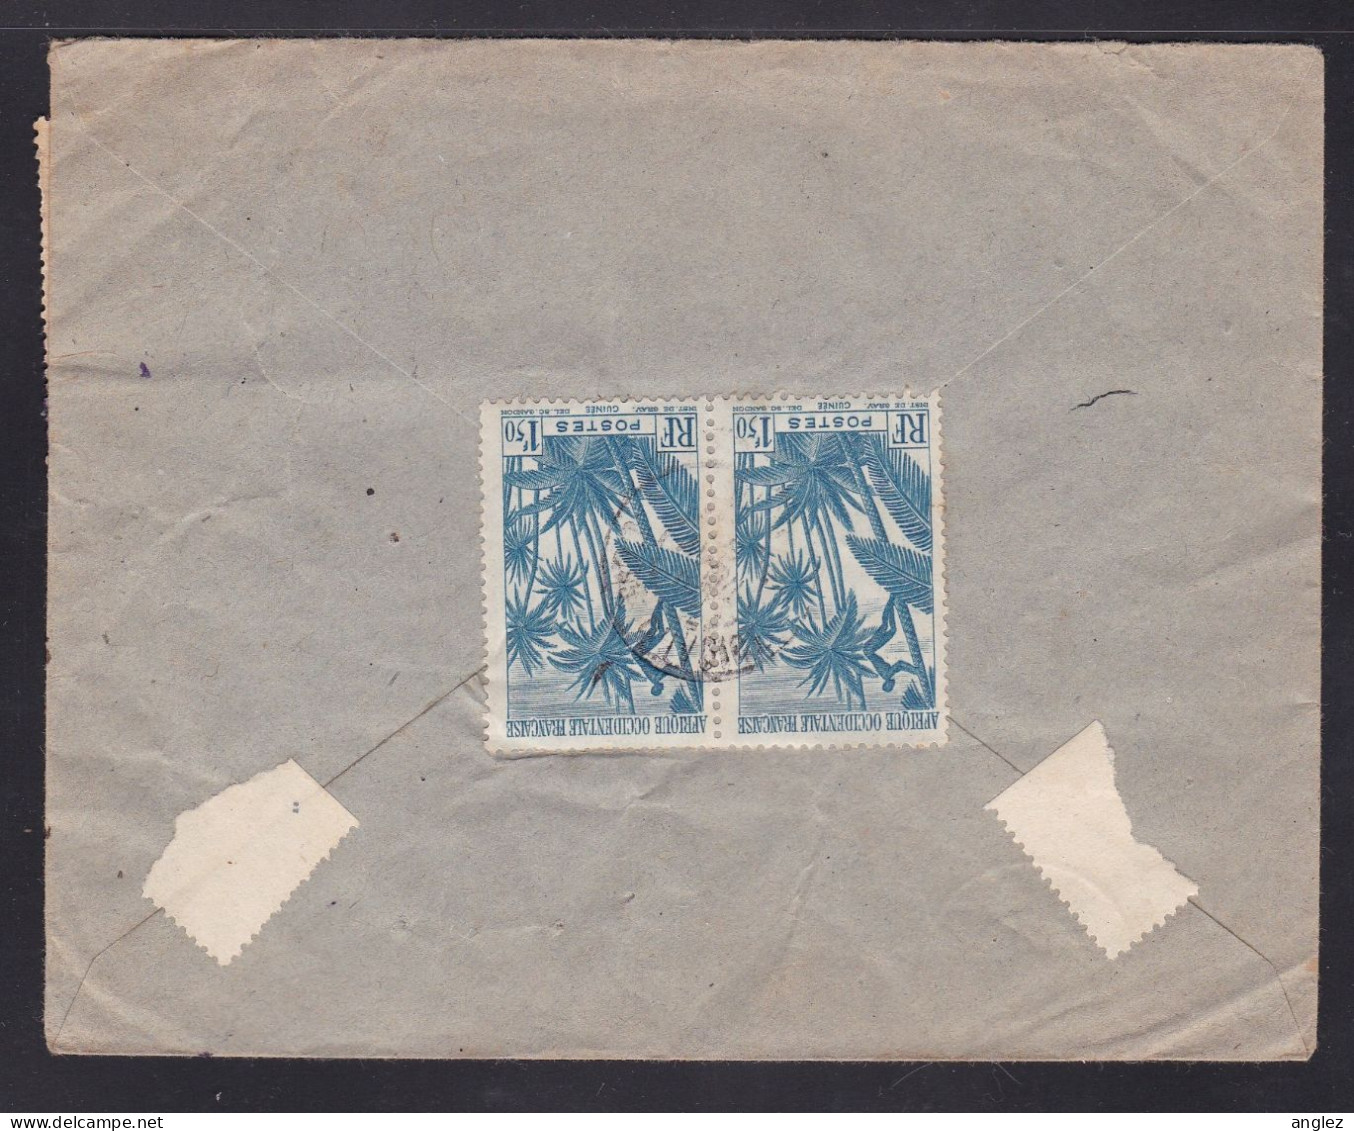 France / AOF / Cote D'Ivoire / Ivory Coast - 1950 Airmail Cover Divo To Chicago USA - Brieven En Documenten